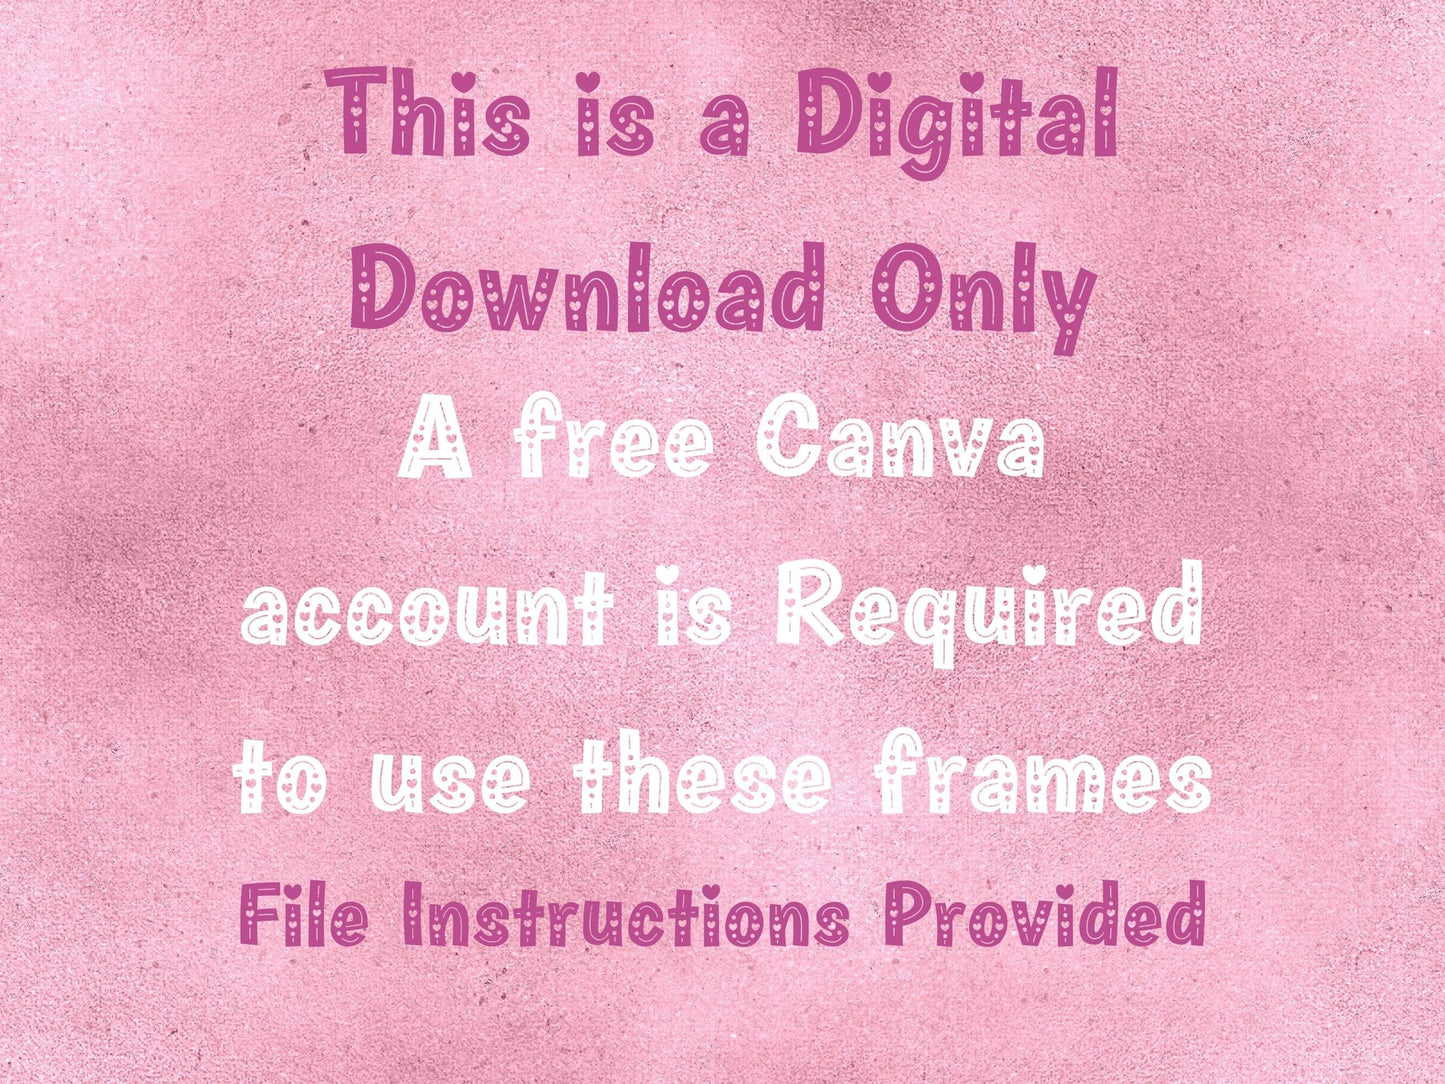 Add Your Own Pattern Love Heart, Create Digital Design Elements CANVA, Easy Drag and Drop Photo or Patterns, Editable Canva Frame Designs